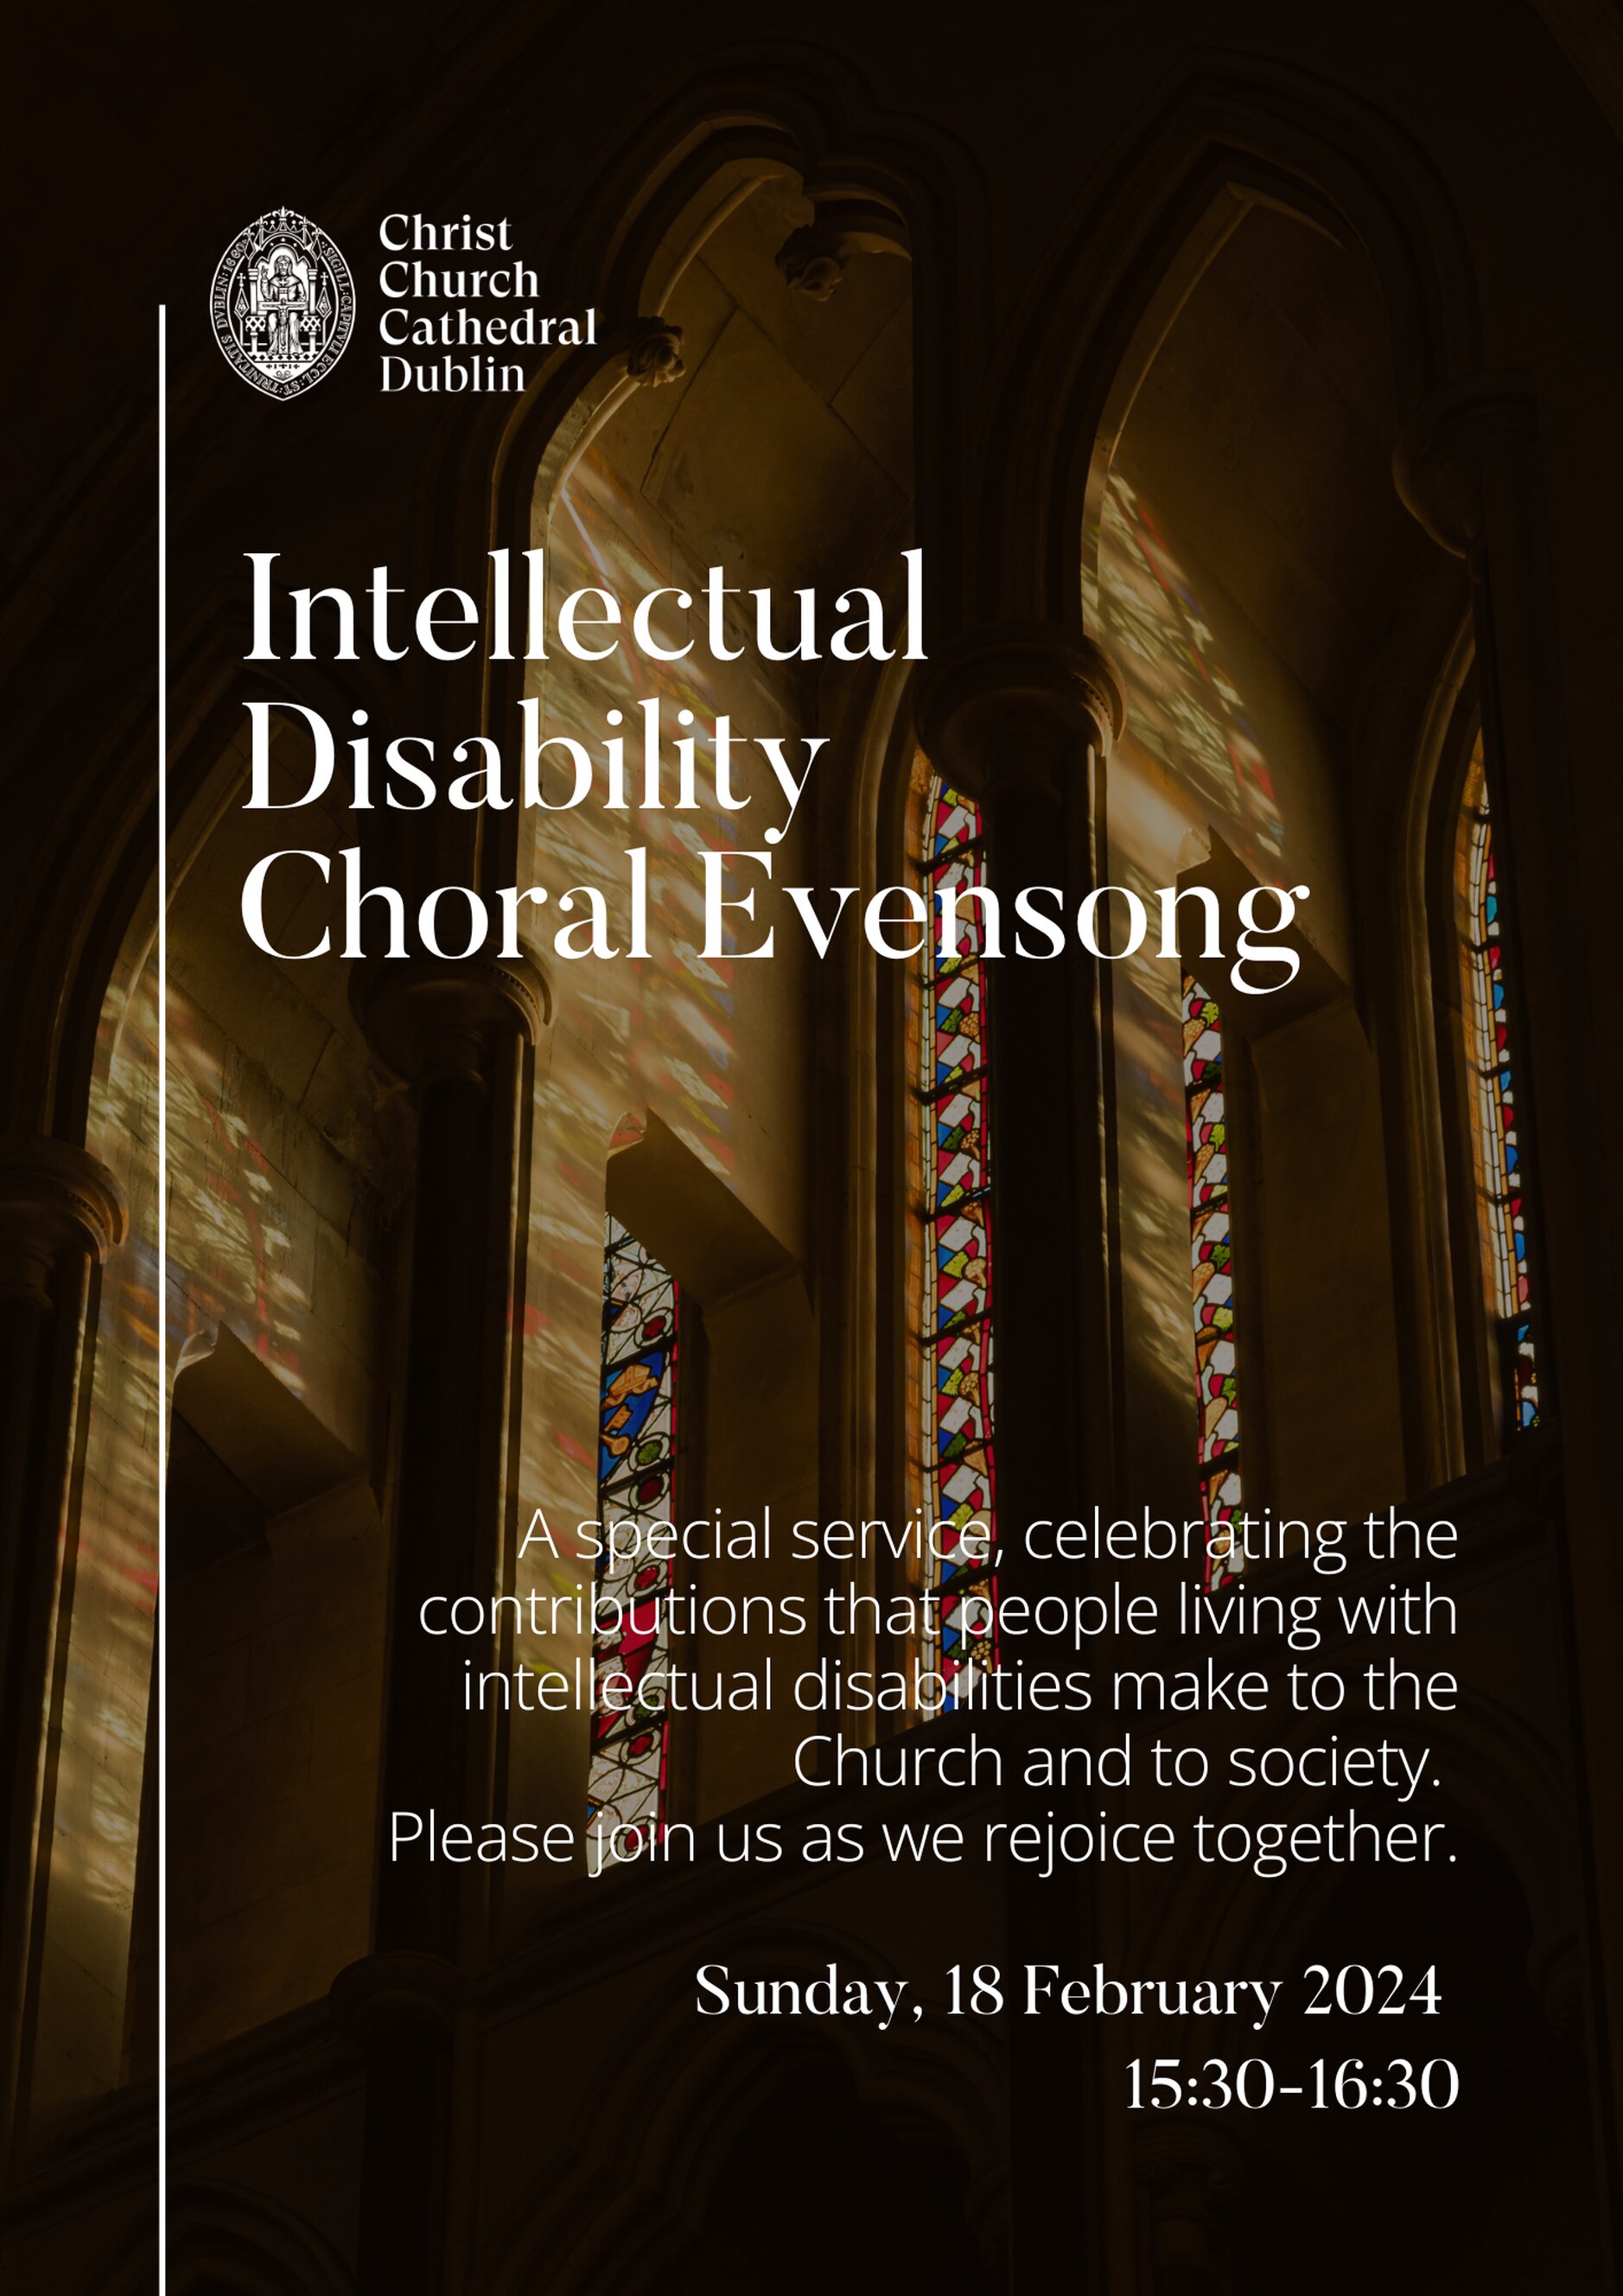 Intellectual Disability Choral Evensong - A Service of Choral Evensong to celebrate people living with intellectual disabilities and the contribution they make to church and society will take place in Christ Church Cathedral, Dublin, this Sunday, February 18, at 3.30pm.

All are welcome to attend and the service will be of particular interest to people living with intellectual disabilities and their families and friends as well as services and organisations which support them.

Please share this invitation with all who may be interested. 